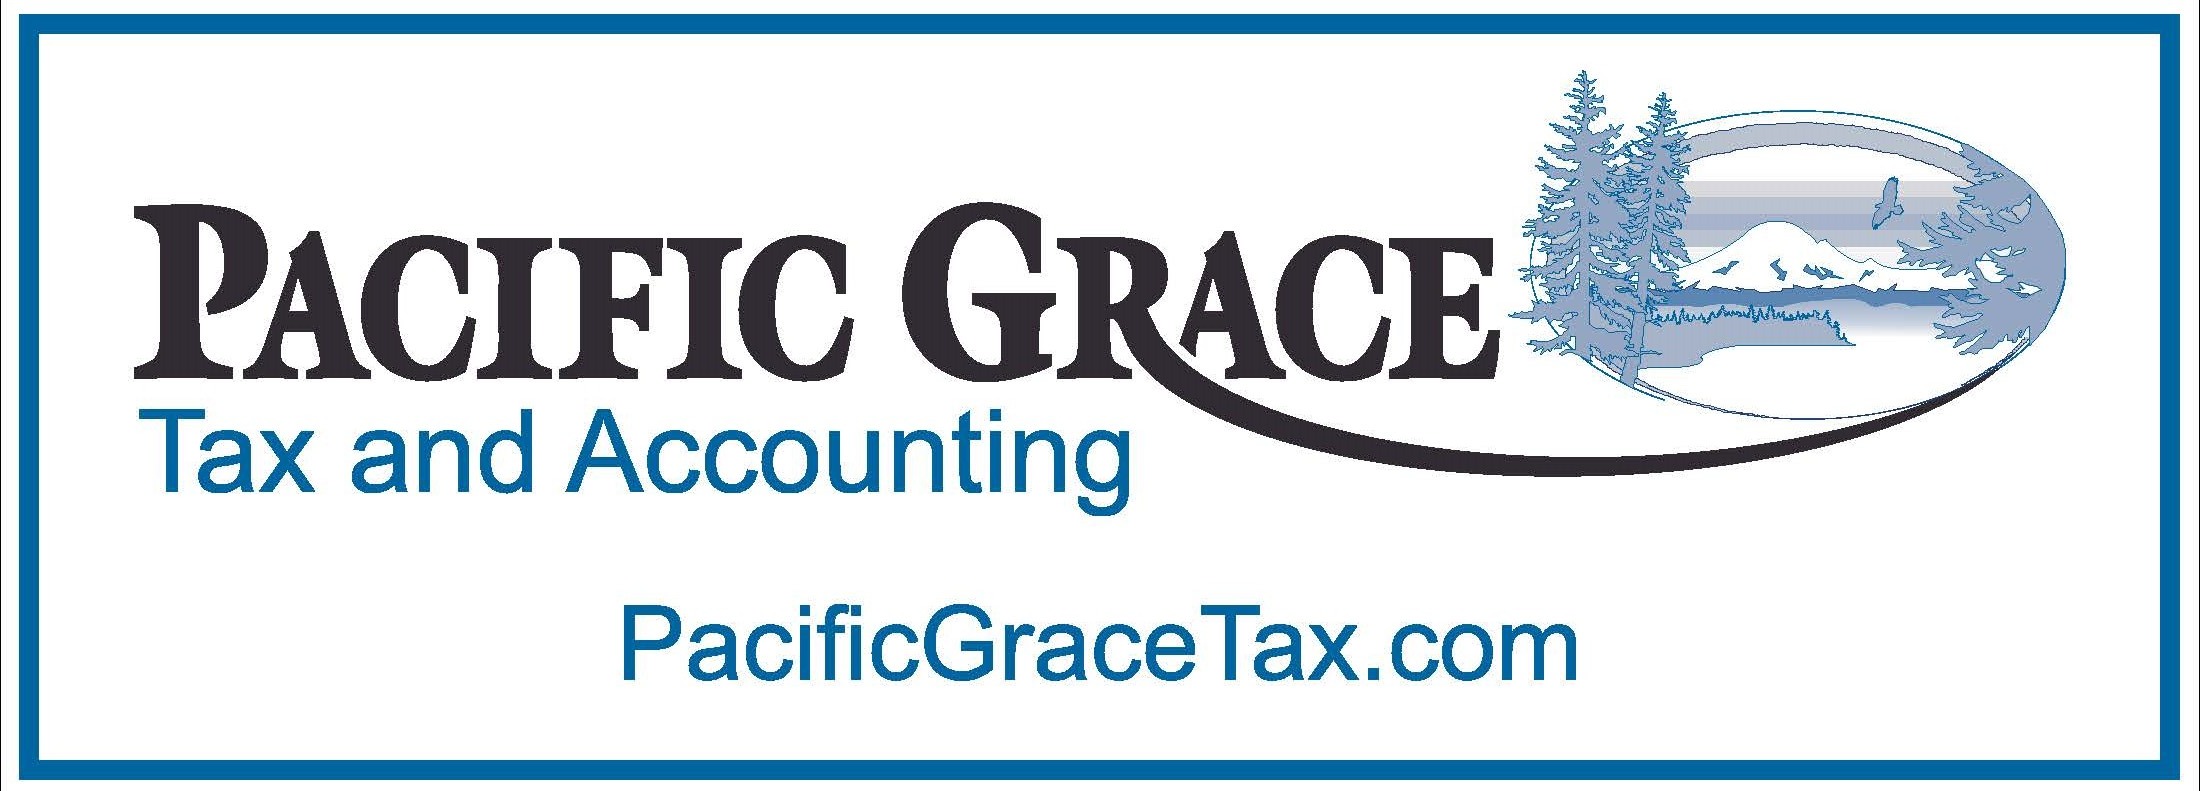 Pacific Grace Tax & Accounting